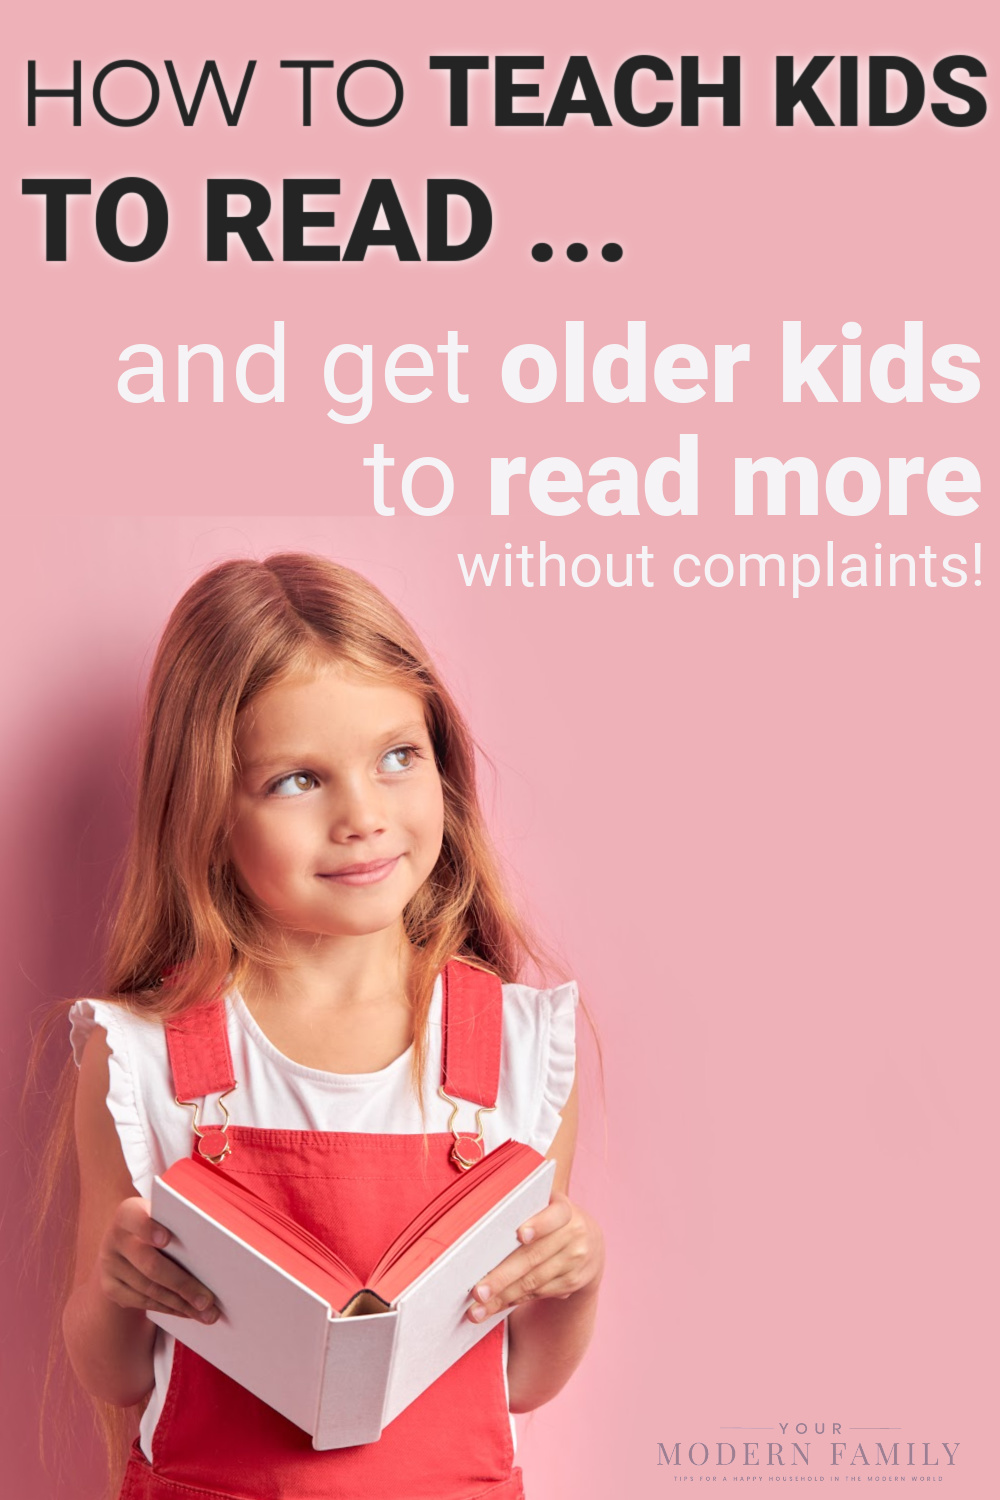 How to Teach Kids to Read (sneak in extra reading for kids!)